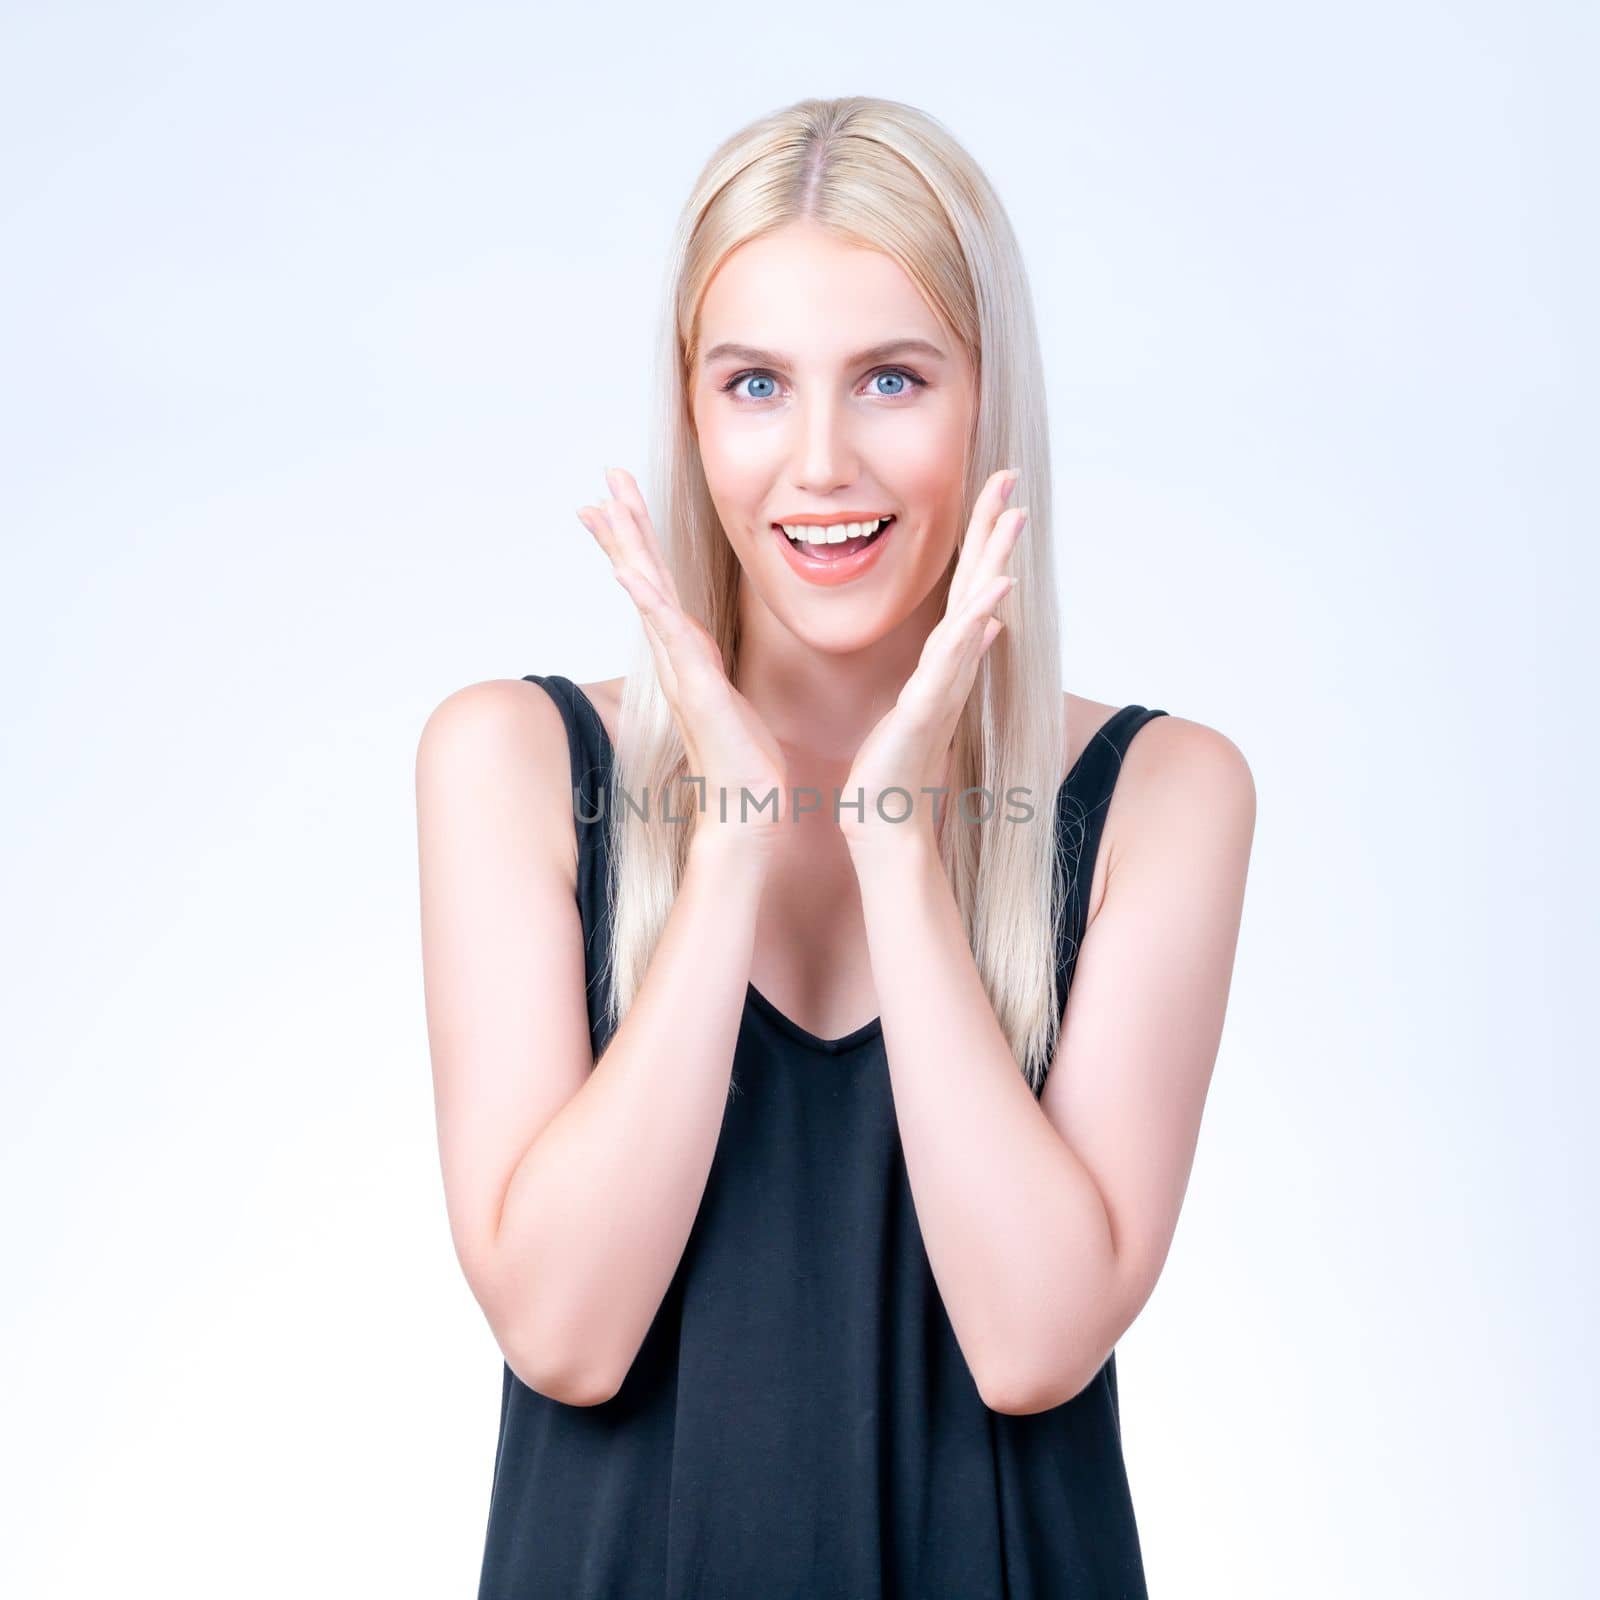 Personable beautiful woman with alluring perfect smooth and clean skin portrait. by biancoblue